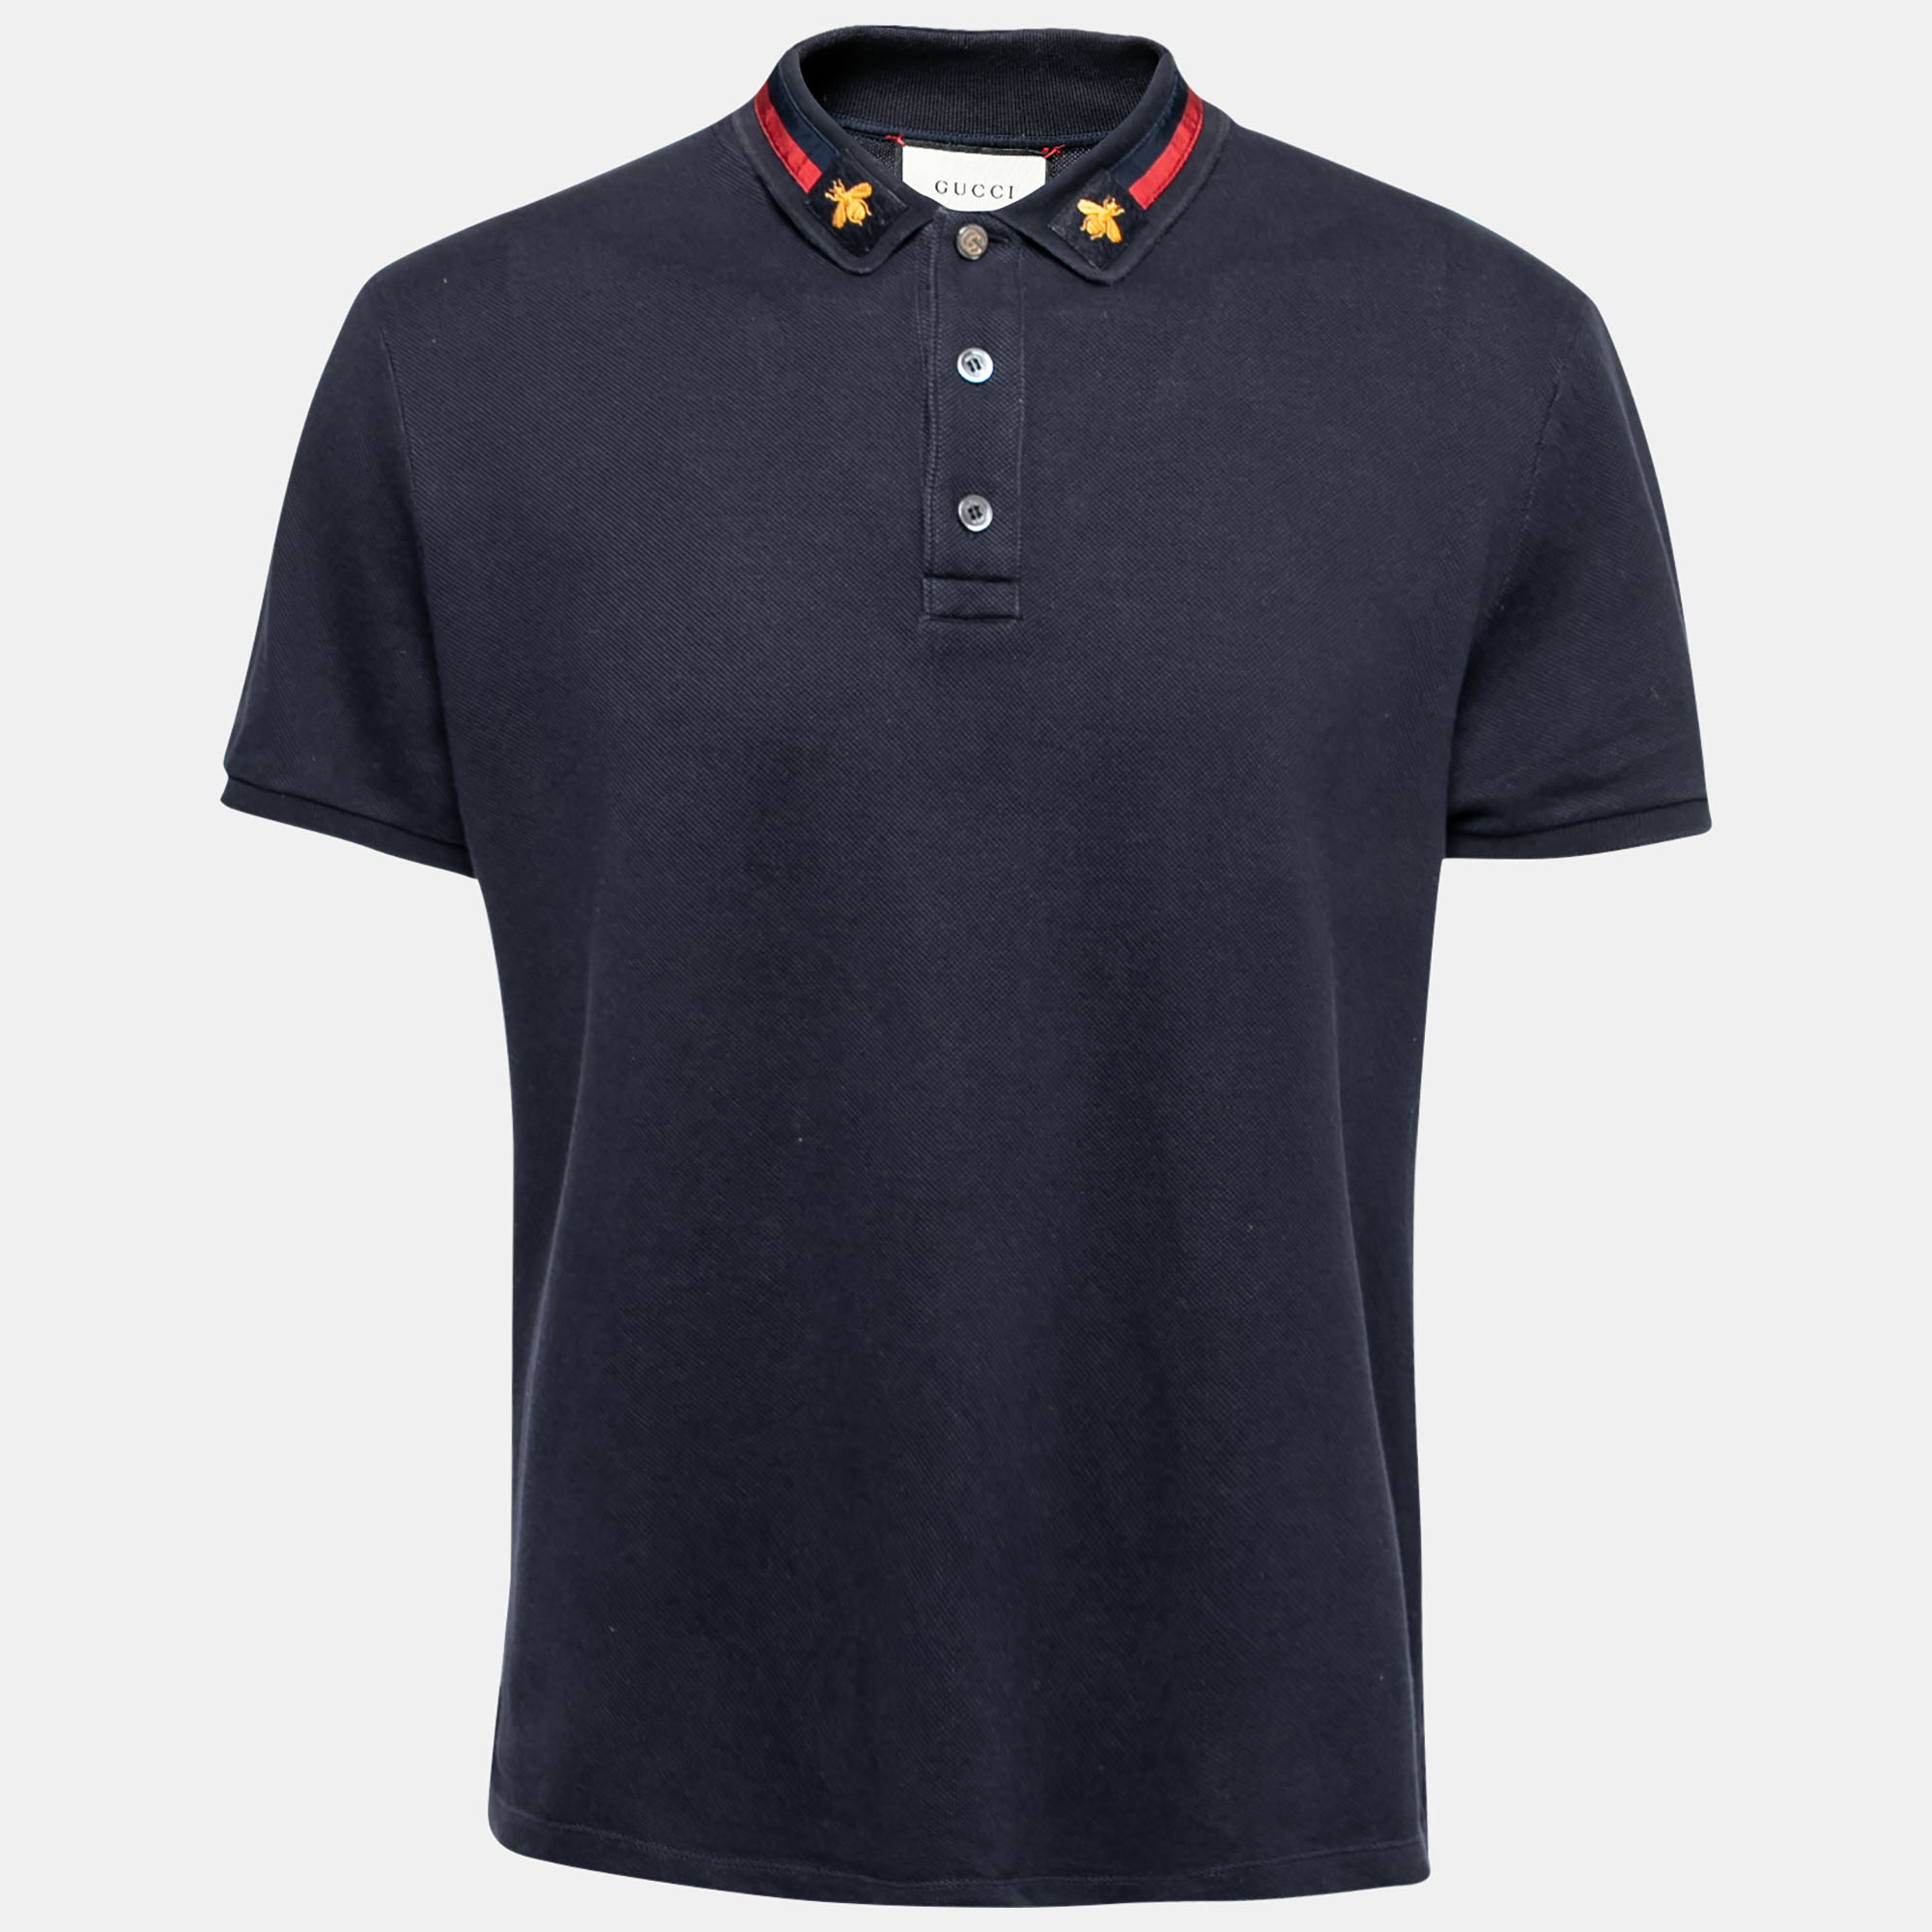 Pre-owned Gucci Navy Blue Cotton Pique Web Stripe Bee Appliqued Polo T-shirt Xxl